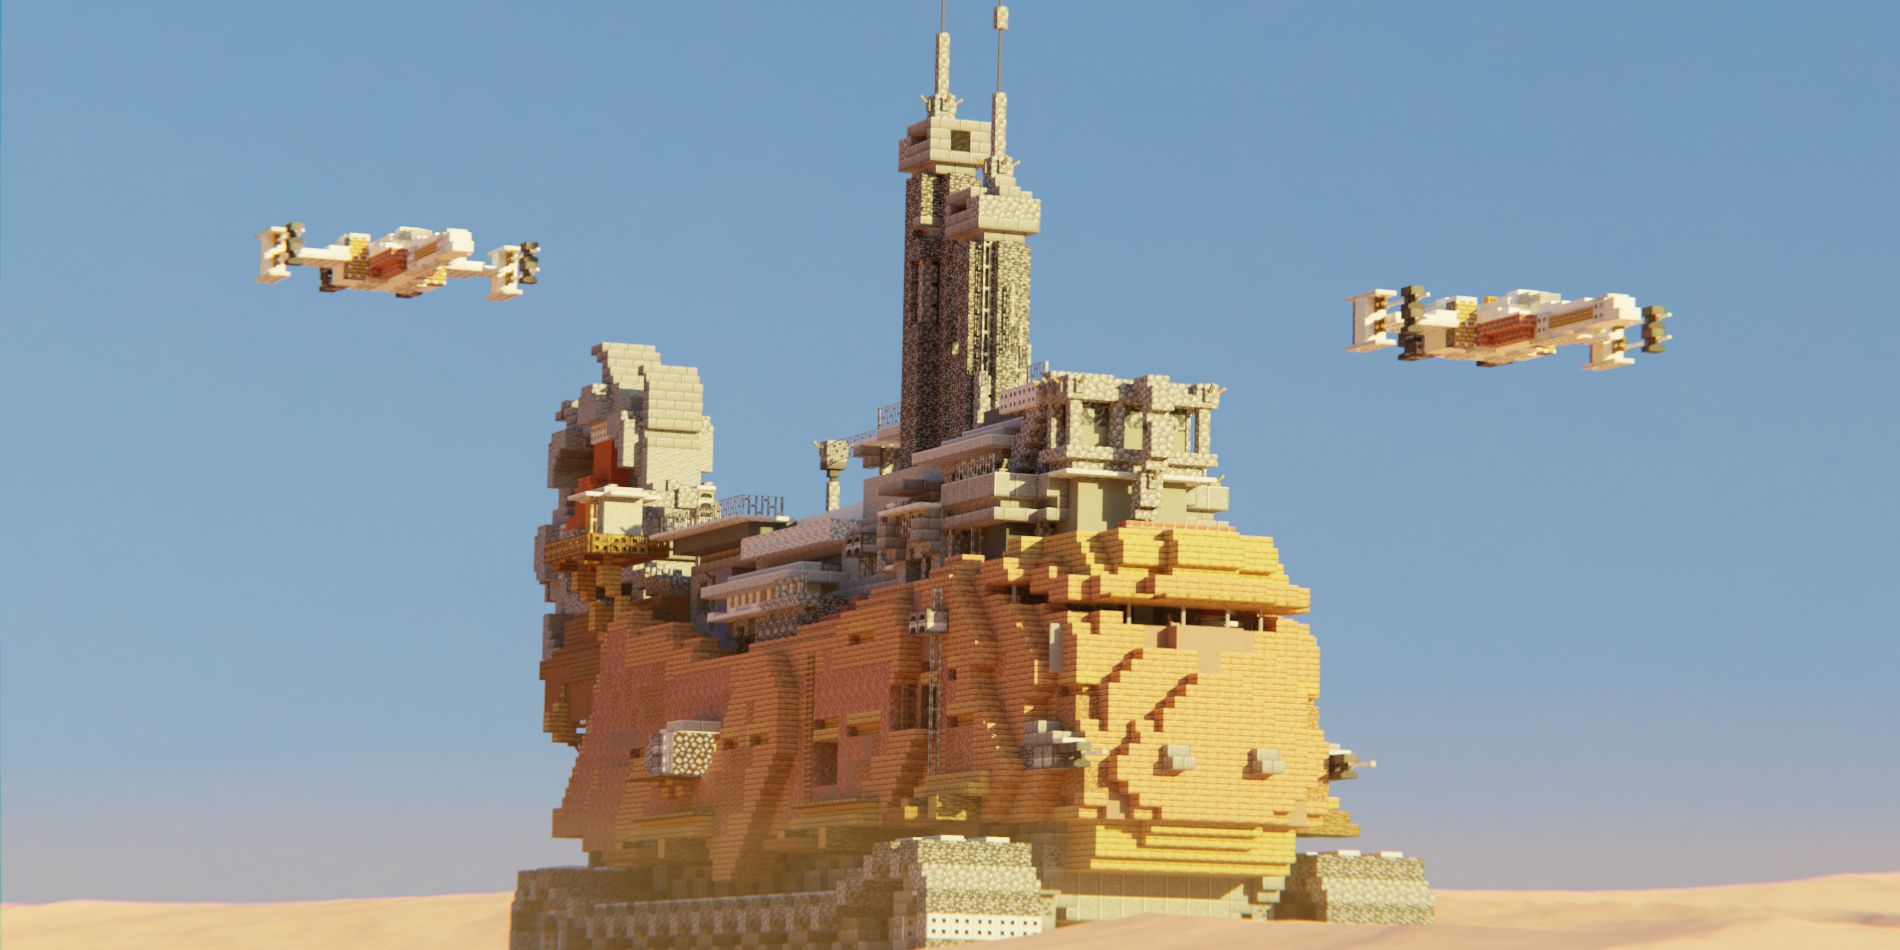 A Minecraft build of a Star Wars sandcrawler inspired vehicle with two x wings flying above.